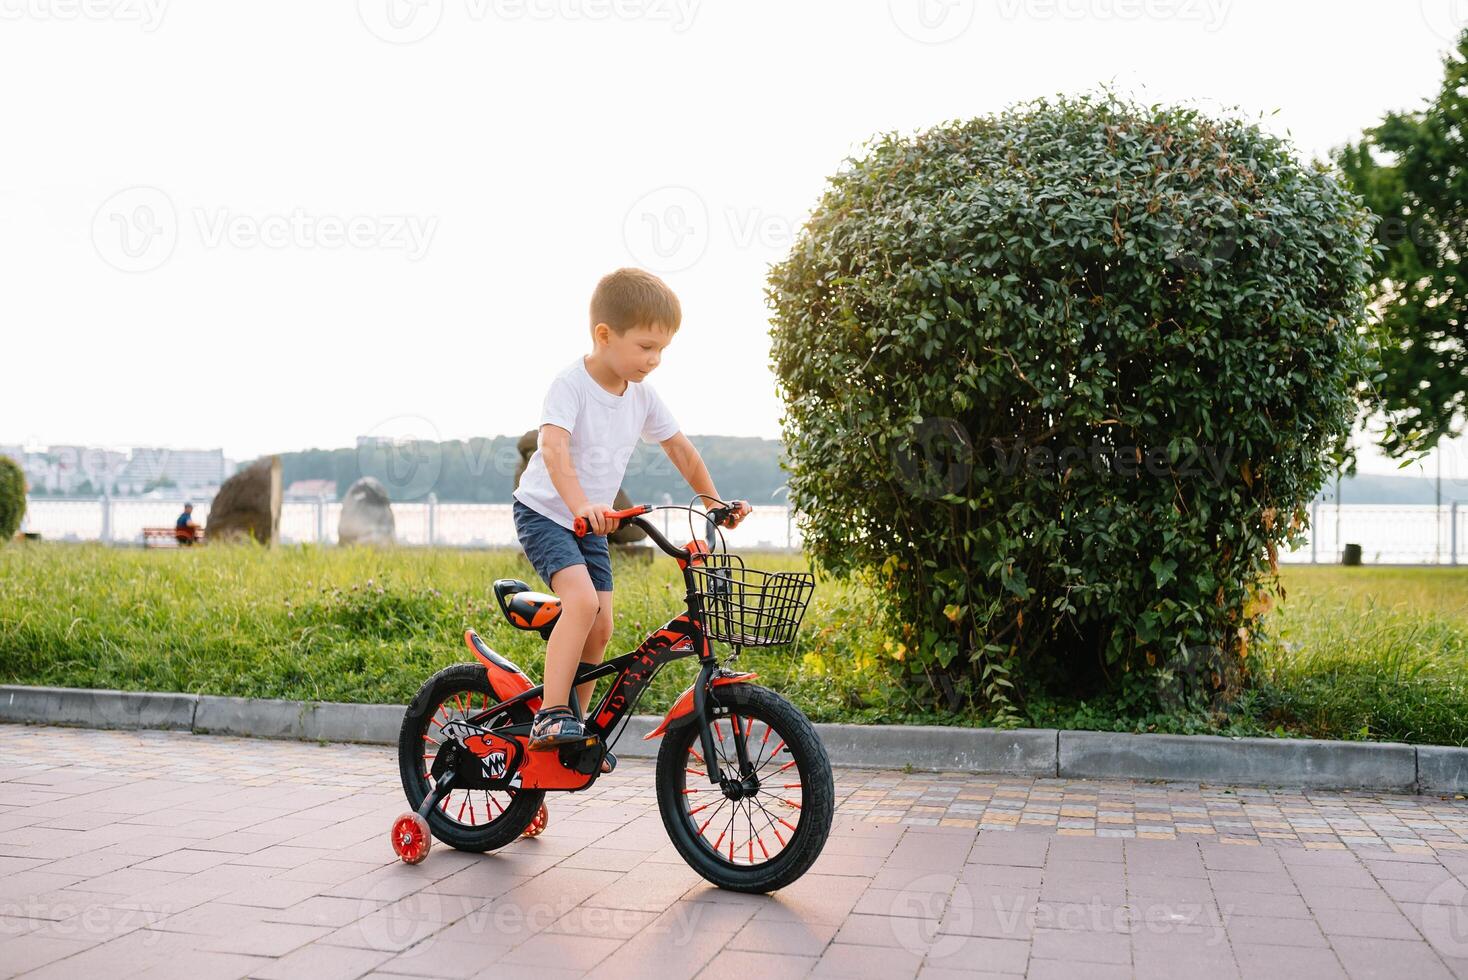 children on a bicycle at asphalt road in early morning. Little boy learns to ride a bike in the park. Happy smiling child, riding a cycling photo